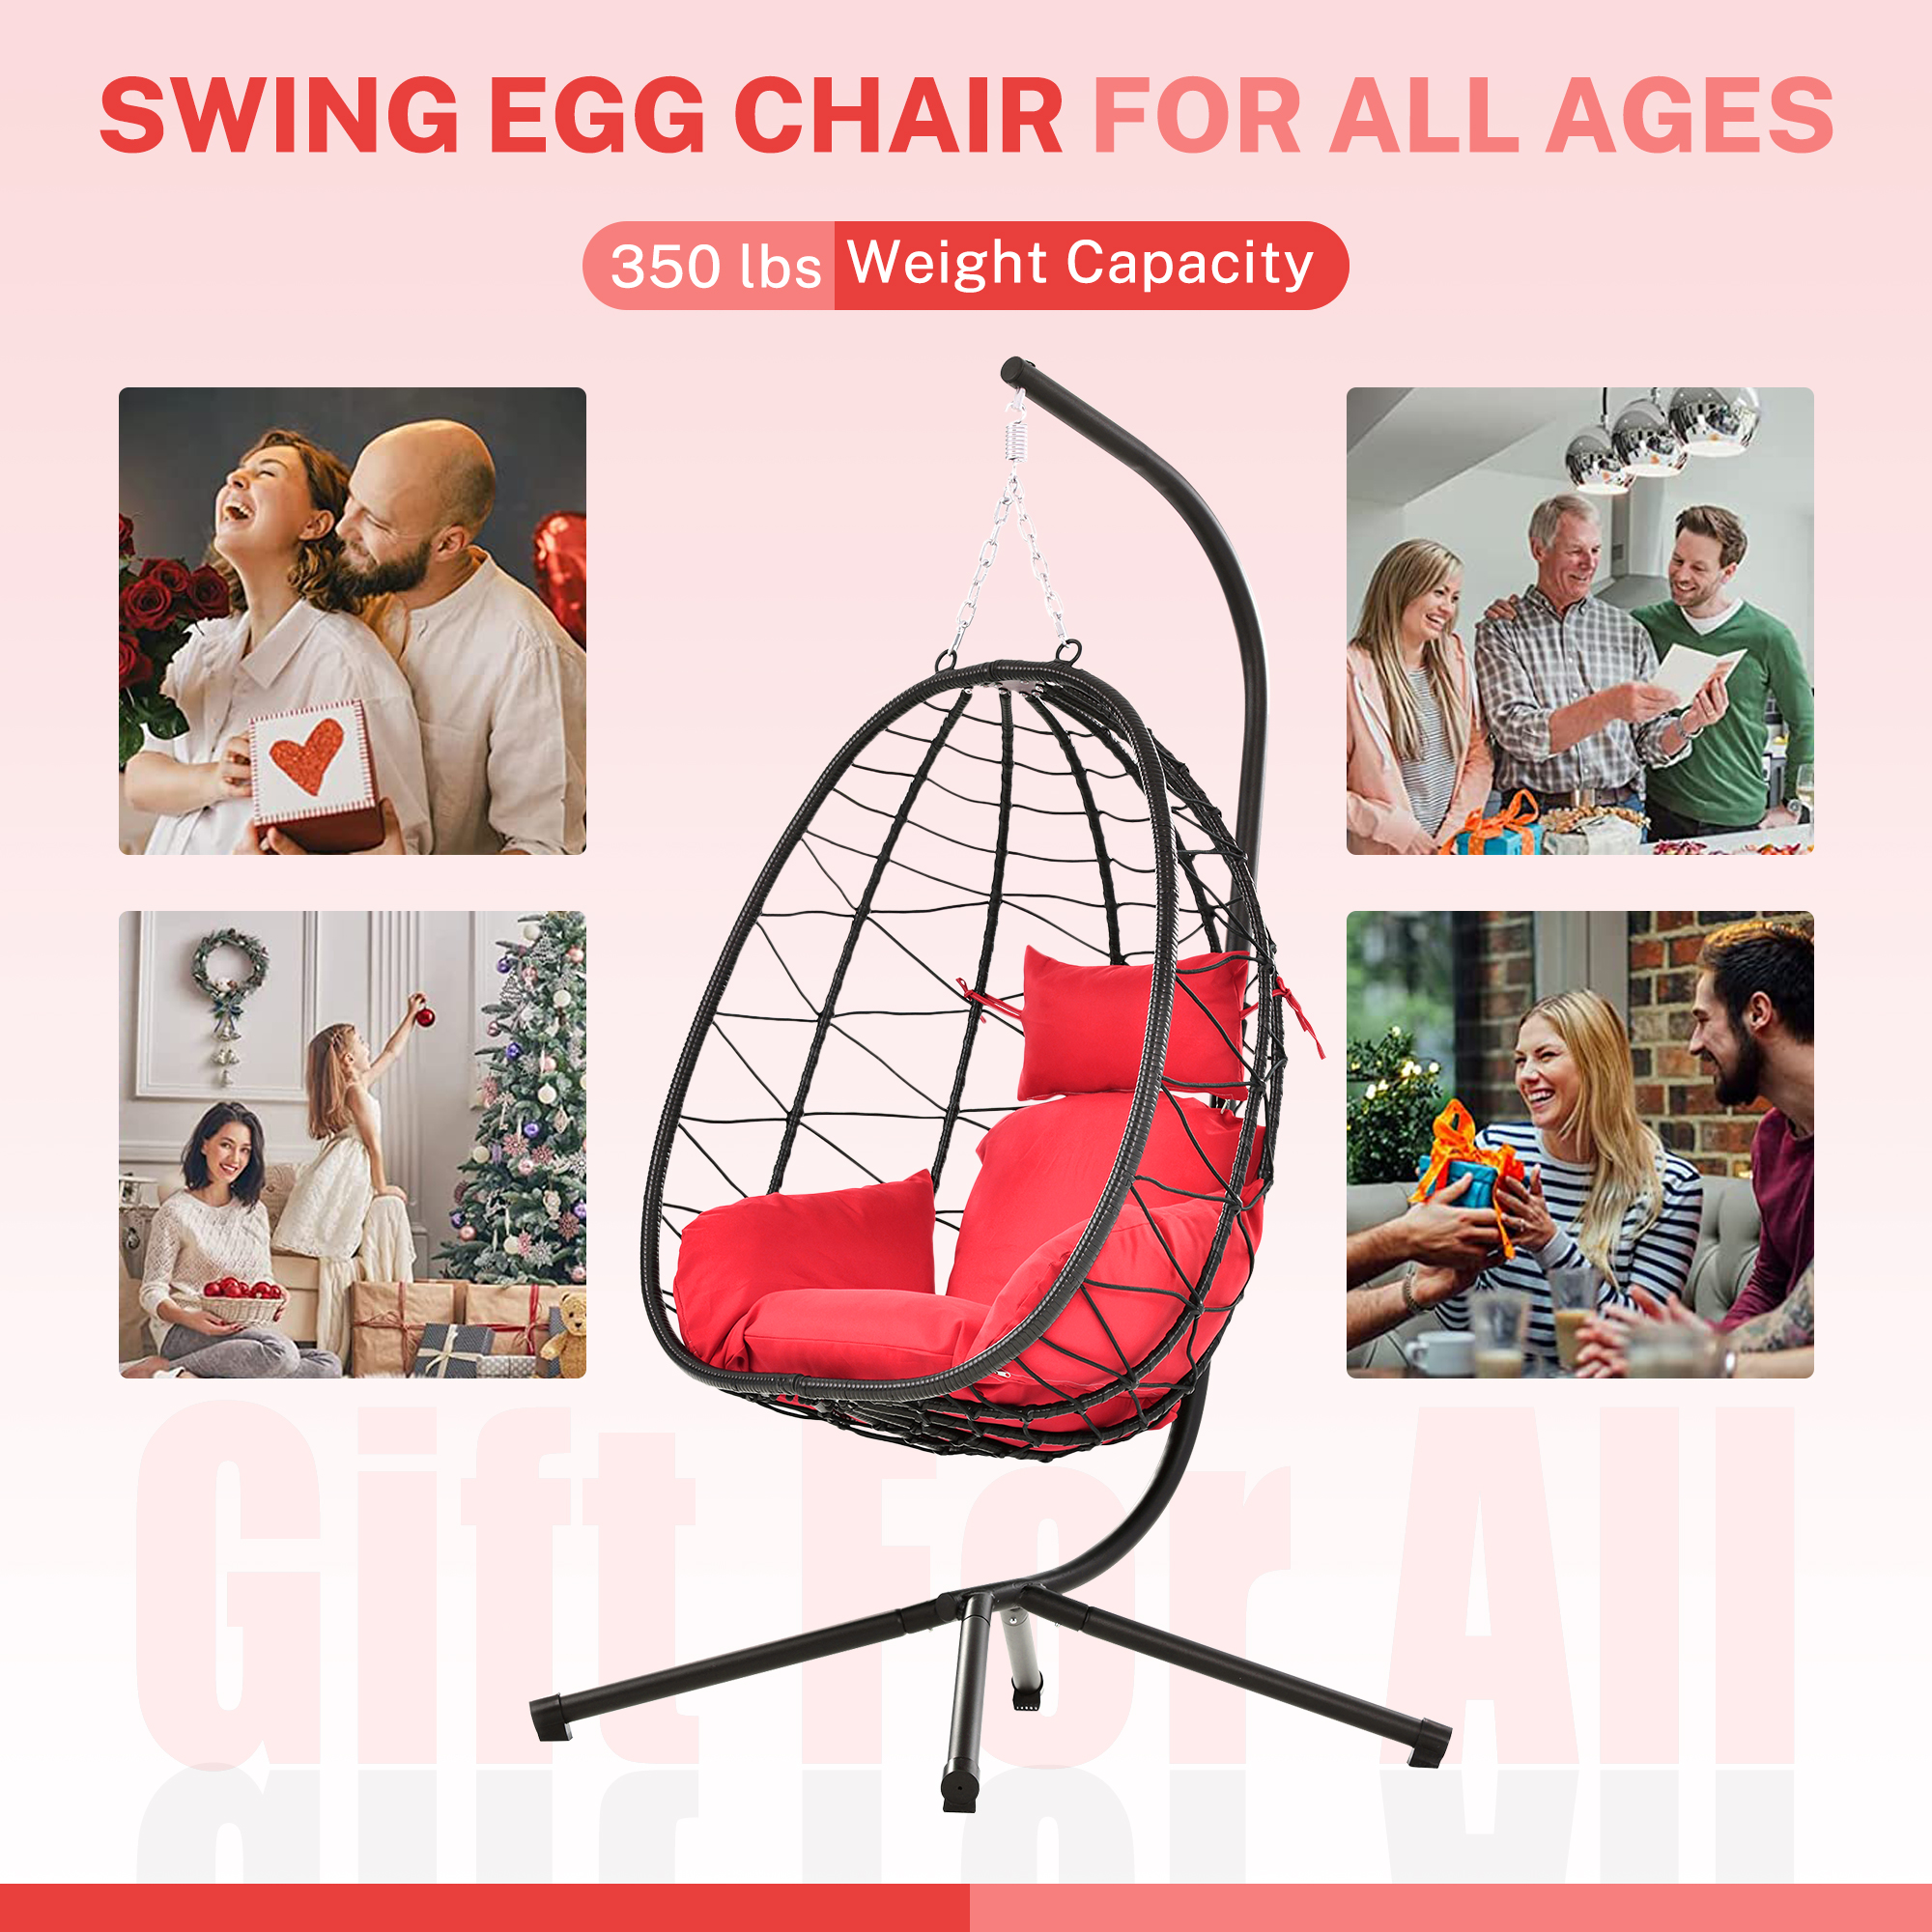 Swing Egg Chair, Outdoor Hanging Egg Chair with Stand, Wicker Swing Chair w/ Seat and Back Cushion, All-Weather UV Rattan Lounge Chair for Livingroom, Patio, Deck, Yard, Garden, 350lbs, Red, SS1954 - image 4 of 9